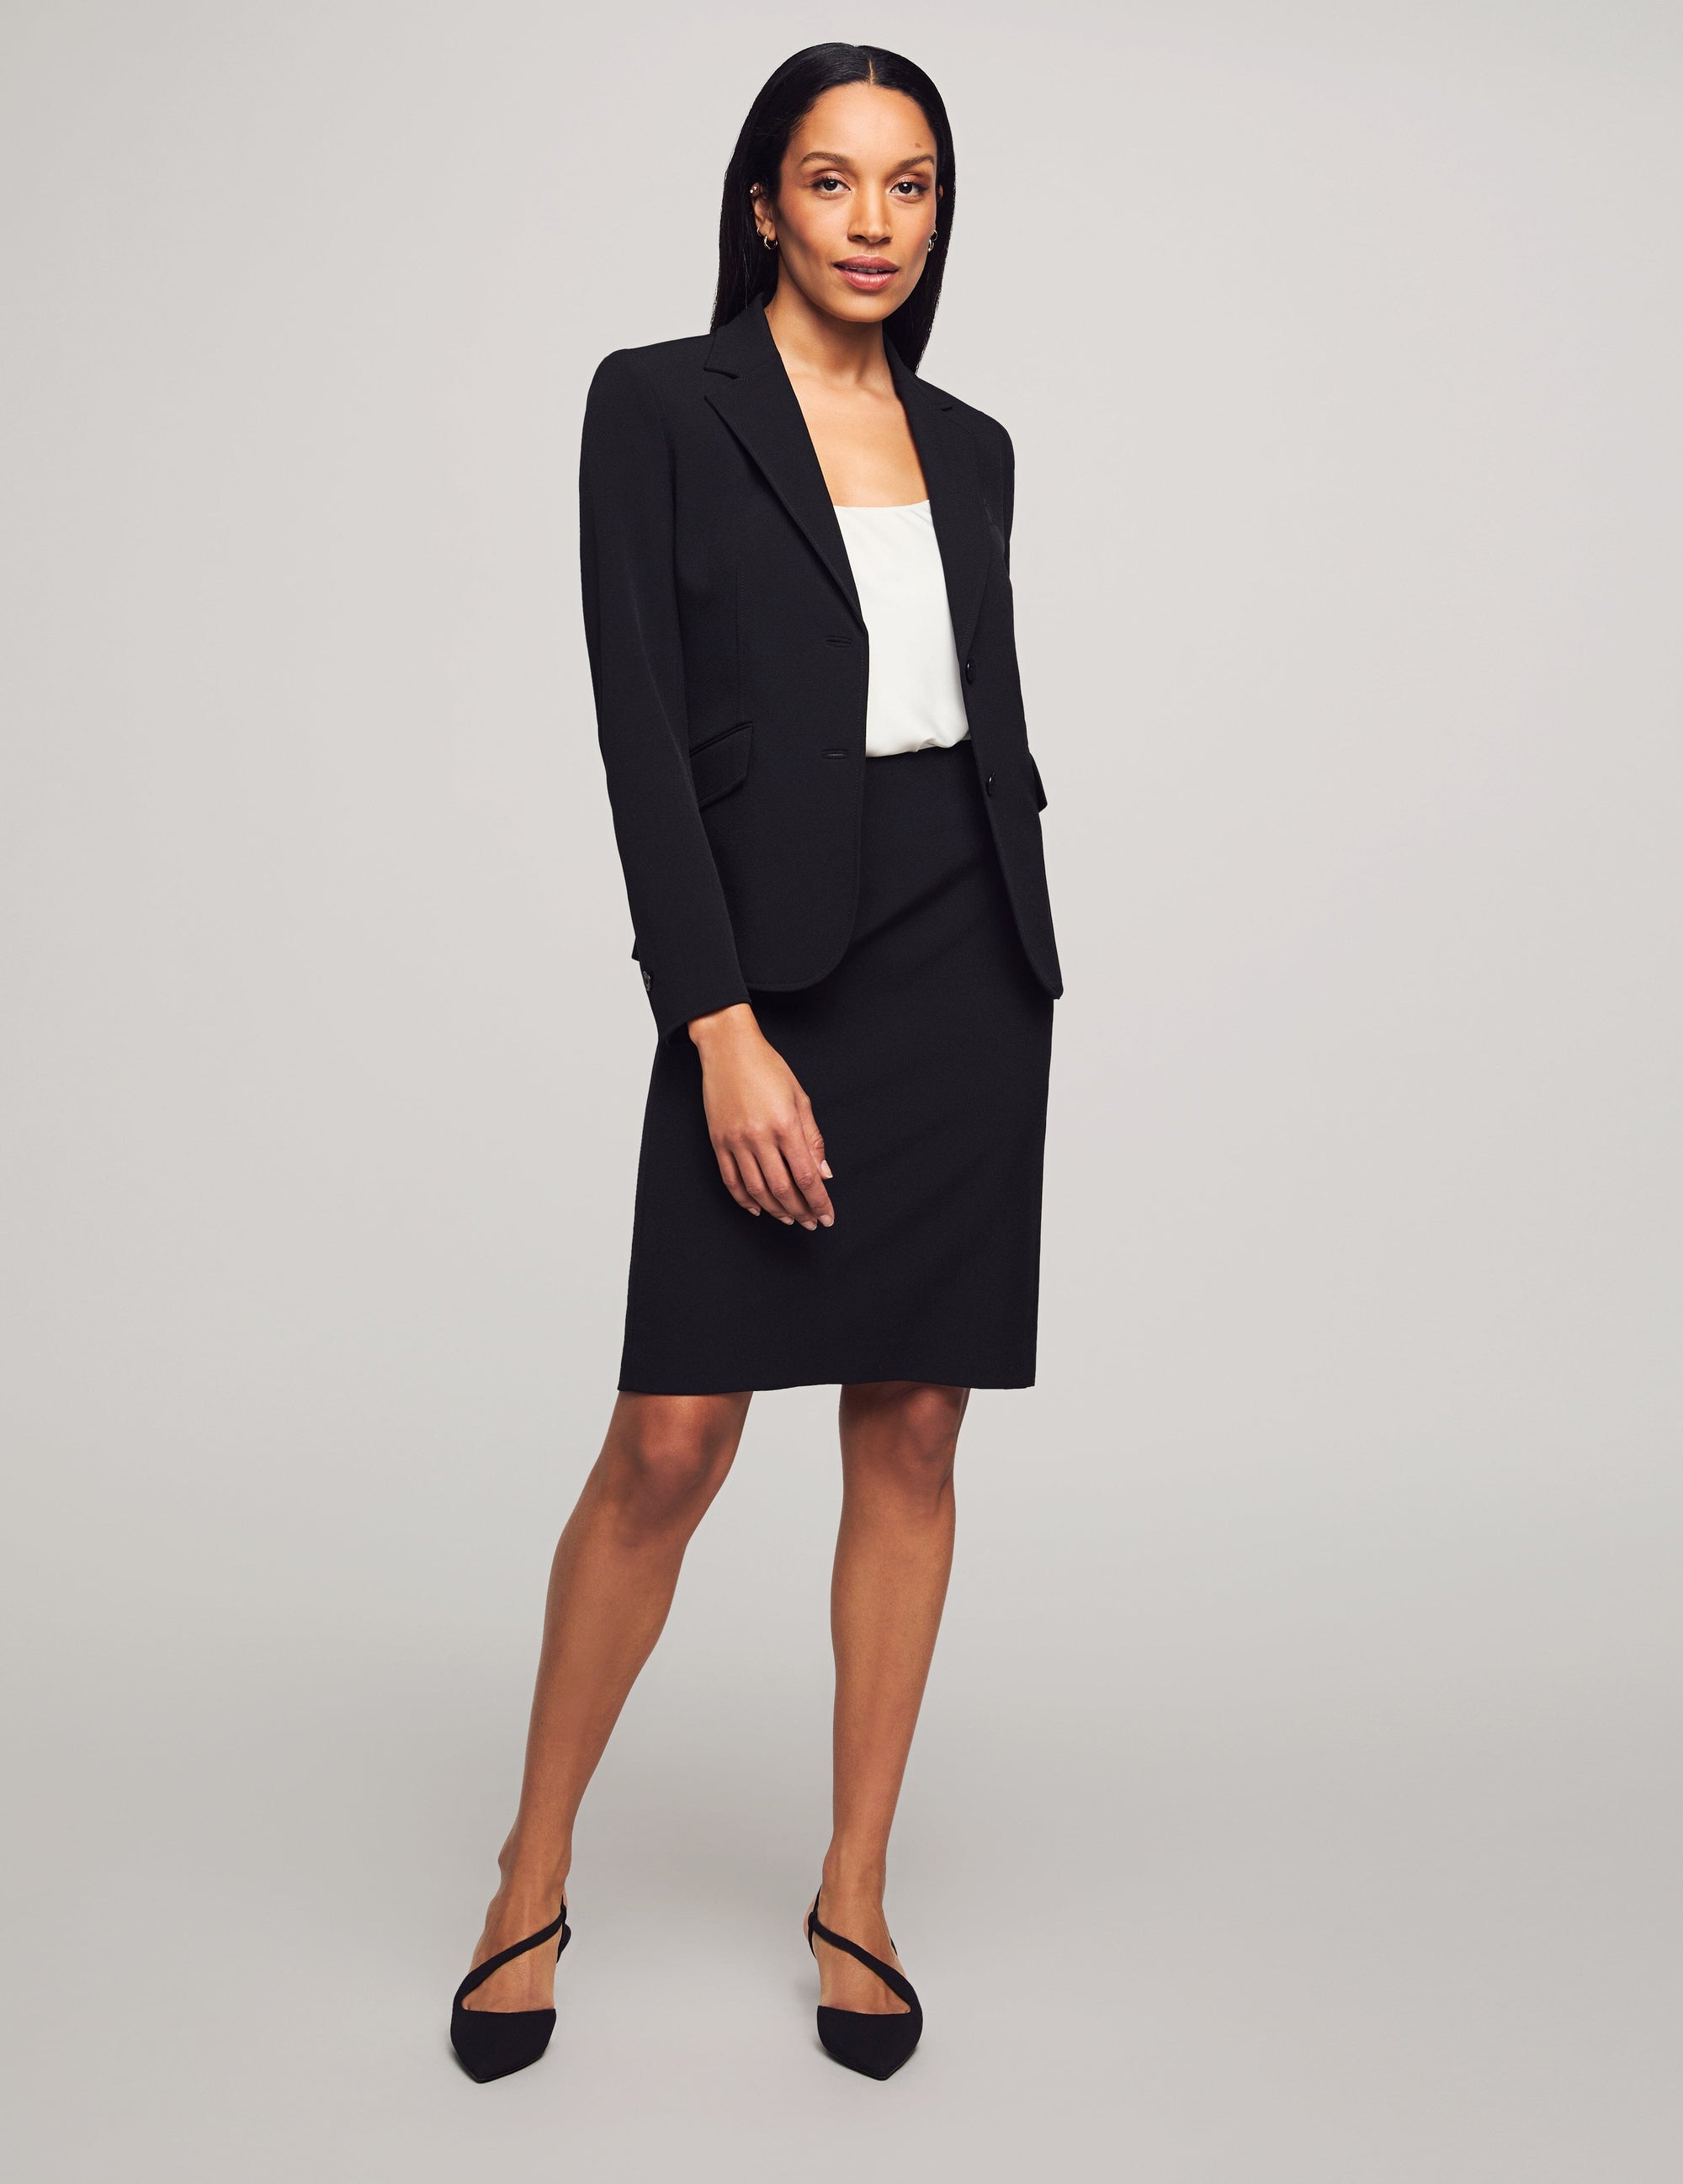 Anne Klein Black Executive Collection 3-Pc. Pants and Skirt Suit Set